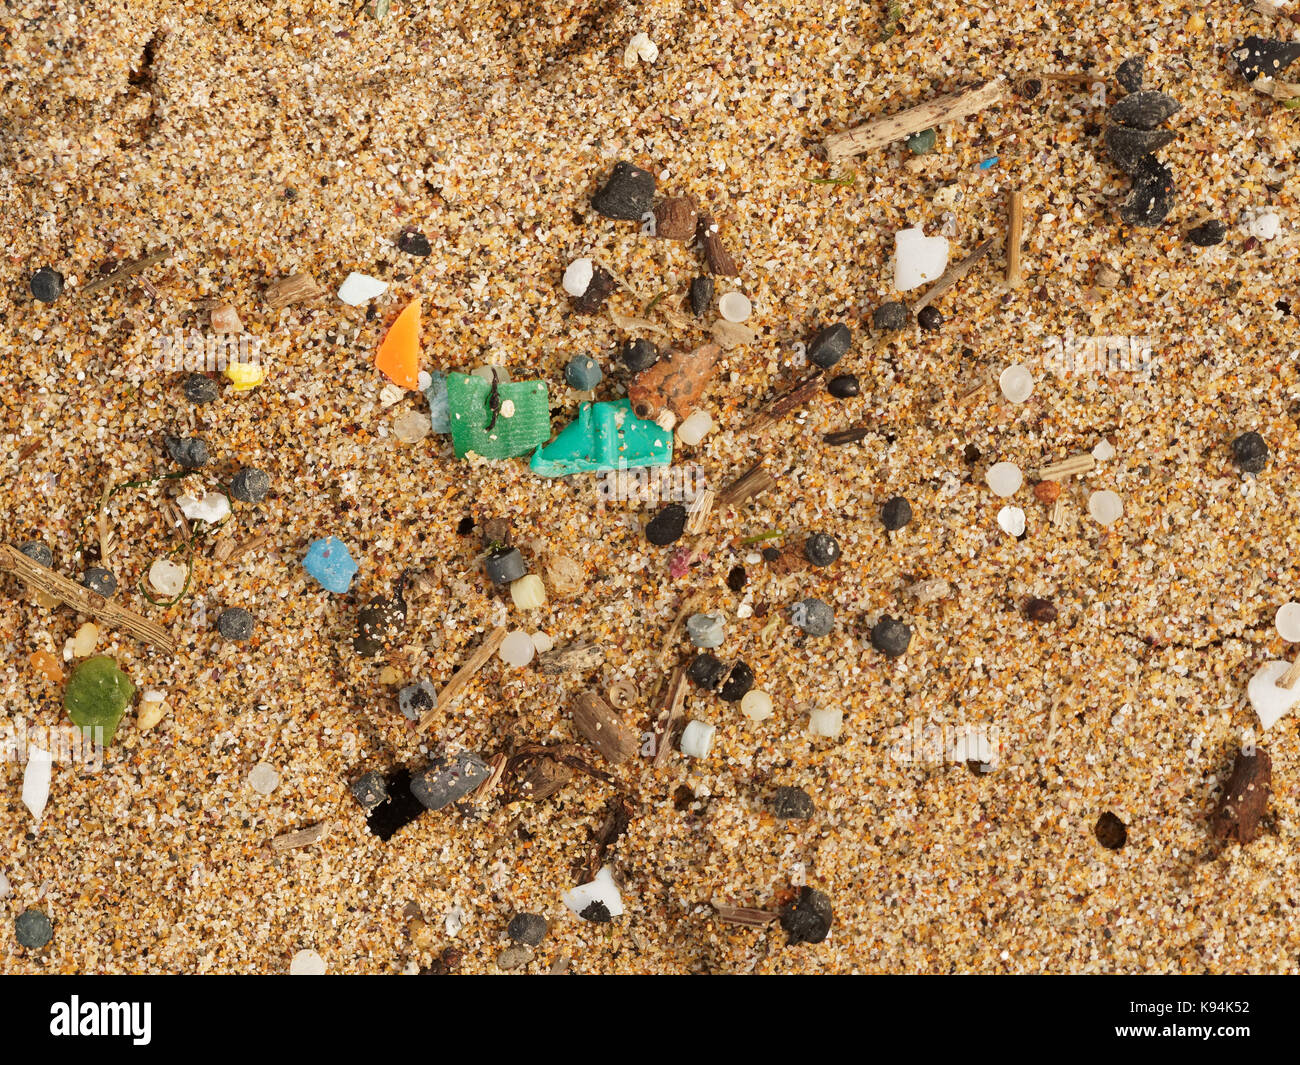 Beaches and rock pools polluted with plastic micro waste washed in on the tide. 21st, September, 2017  Robert Taylor/Alamy Live News.  Newquay, Stock Photo